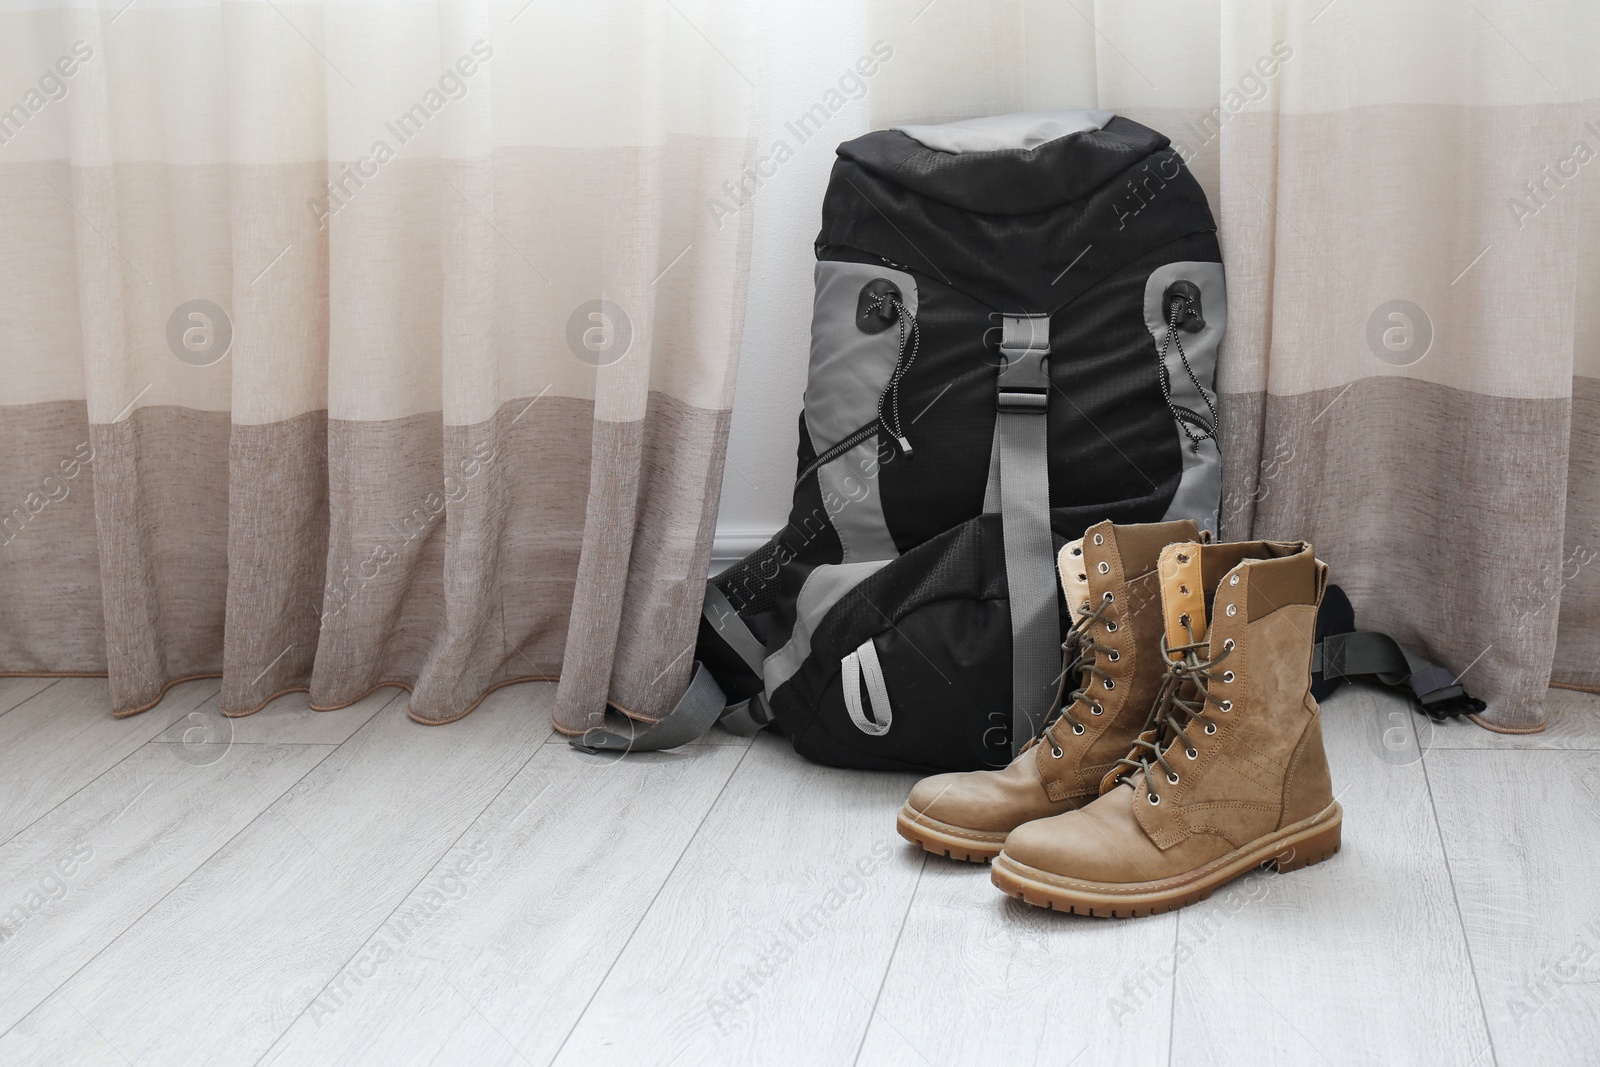 Photo of Backpack and boots on floor near window, space for text. Camping equipment